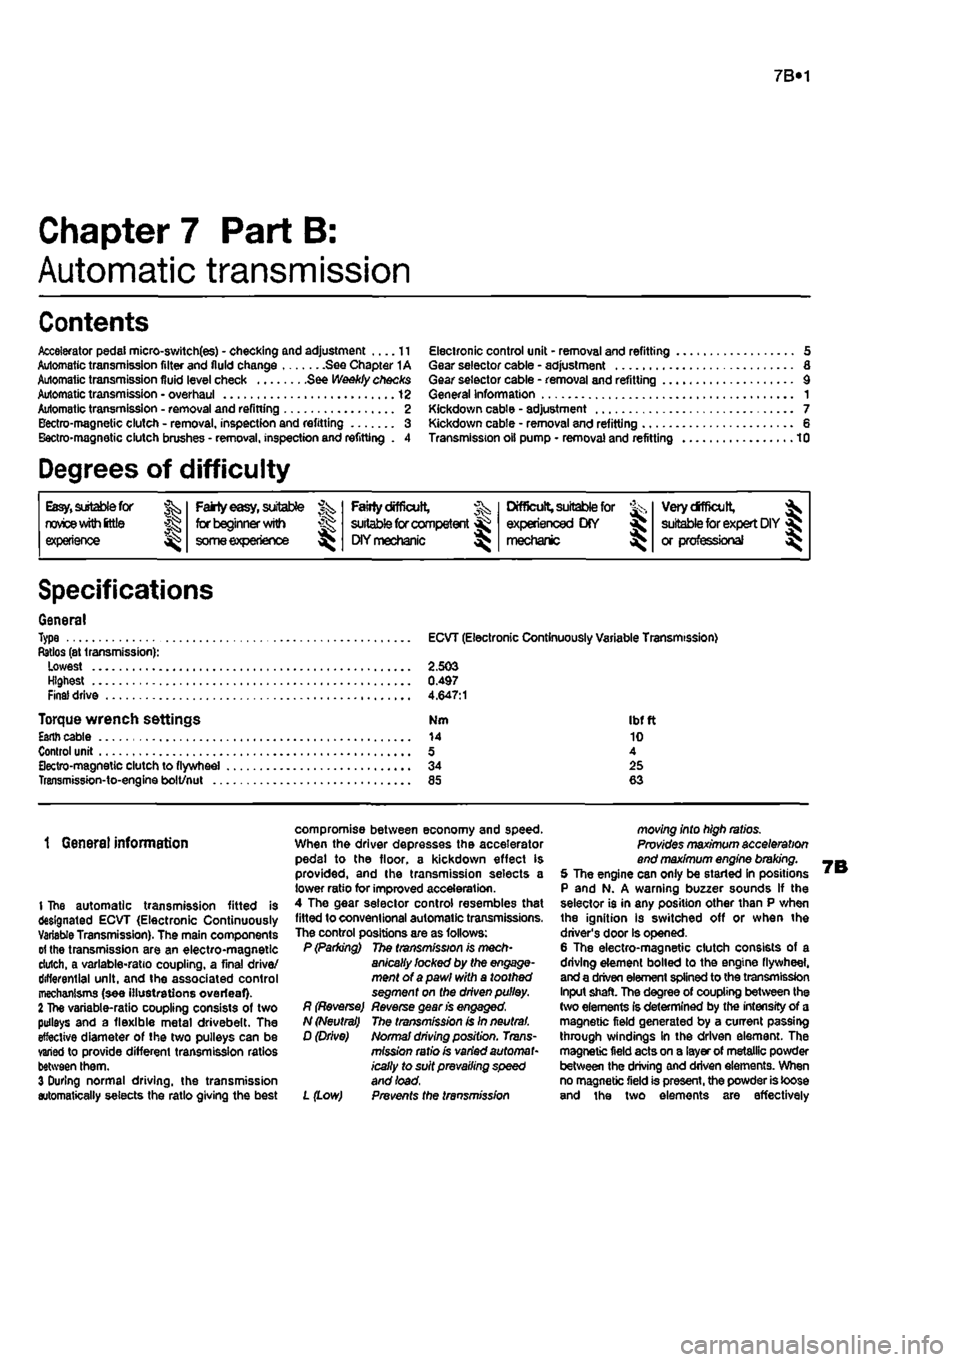 FIAT PUNTO 1997 176 / 1.G Service Manual 
7B«1 
Chapter 7 Part B: 
Automatic transmission 
Contents 
Accelerator pedal micro-switch(es) - checking and adjustment II Automatic transmission filter and fluid change See Chapter 1A Automatic tra